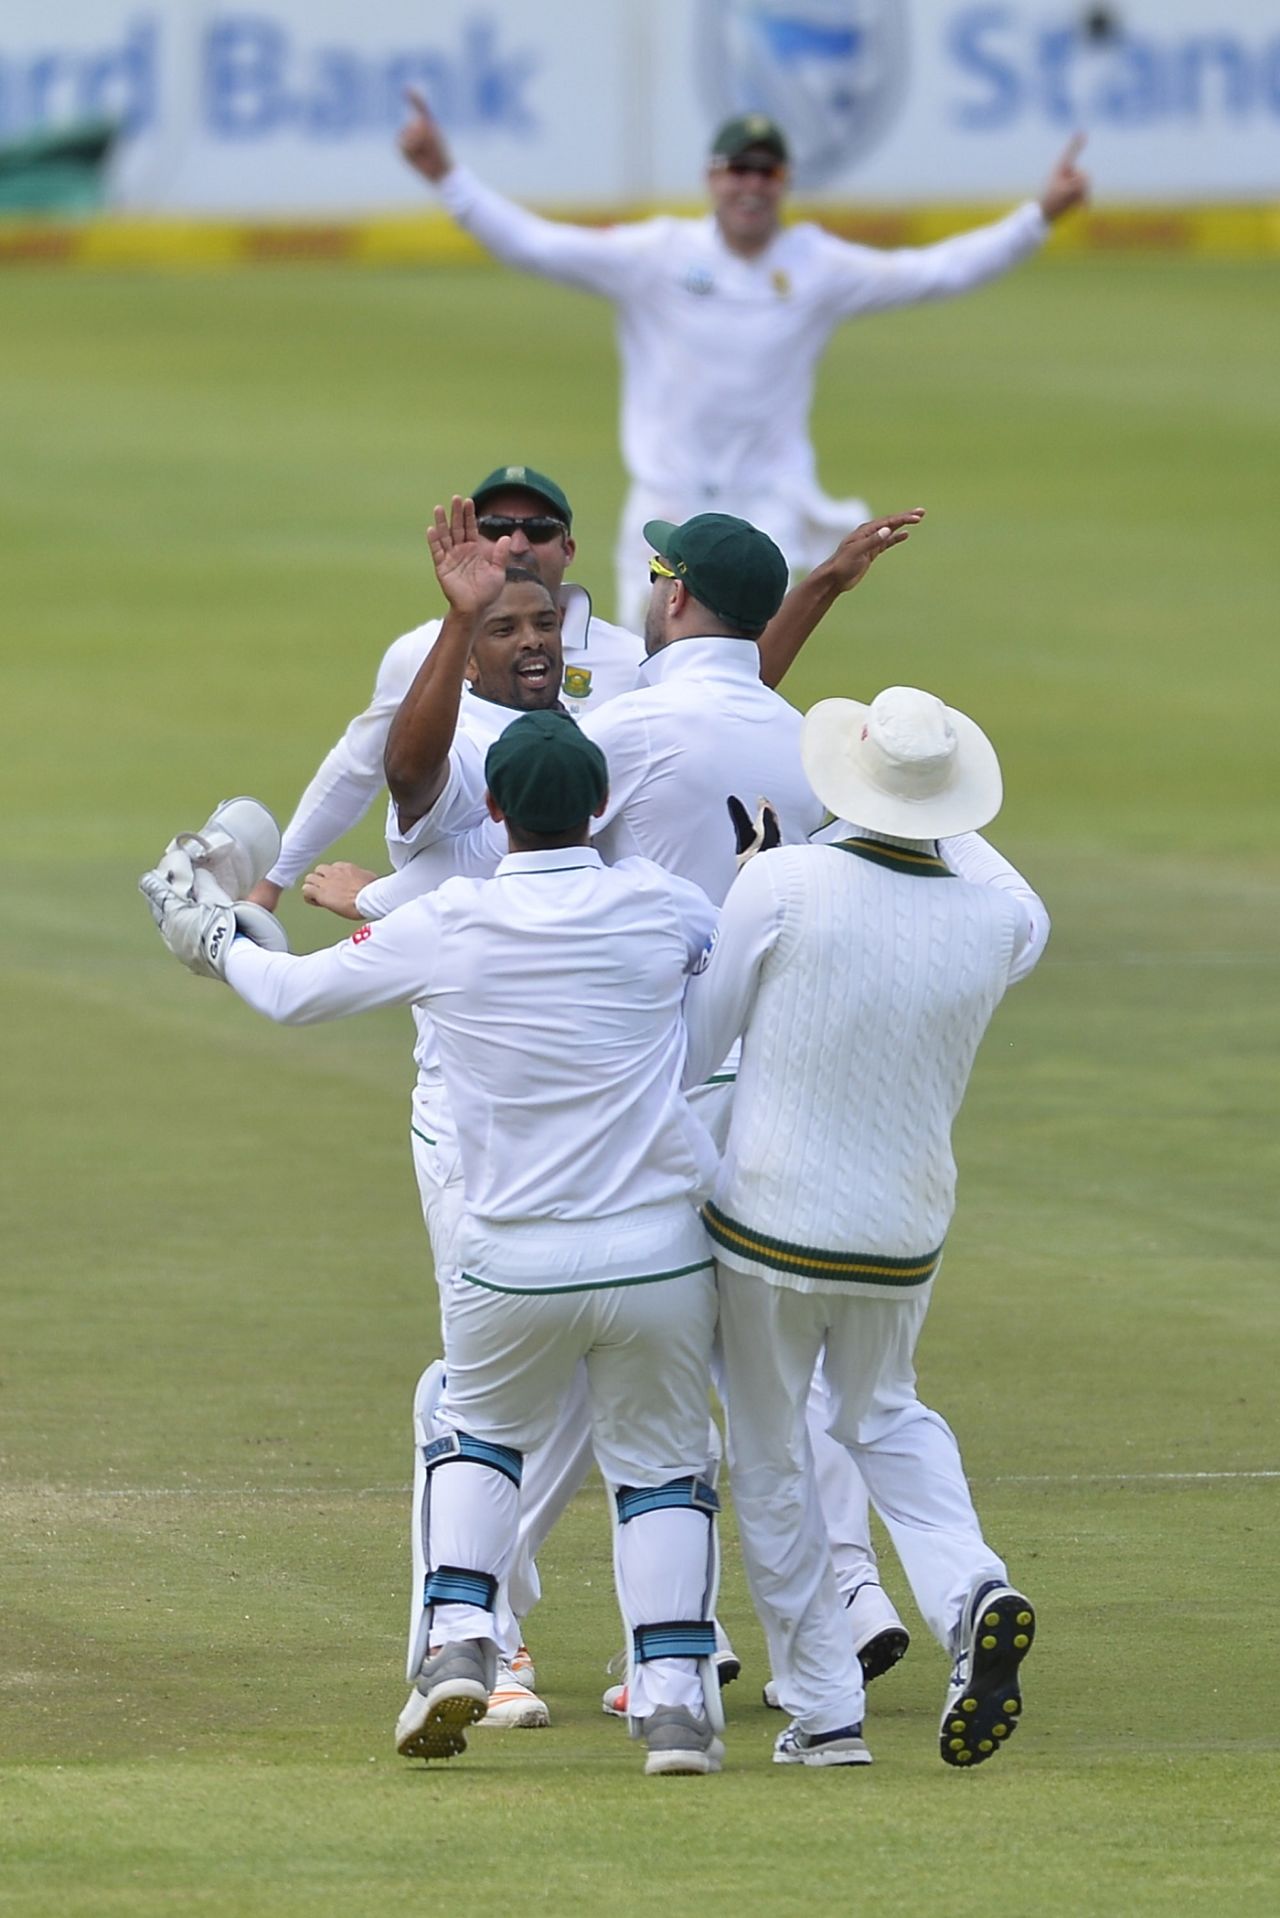 Vernon Philander took three wickets in four balls to seal South Africa's win, South Africa v India, 1st Test, Cape Town, 4th day, January 8, 2018